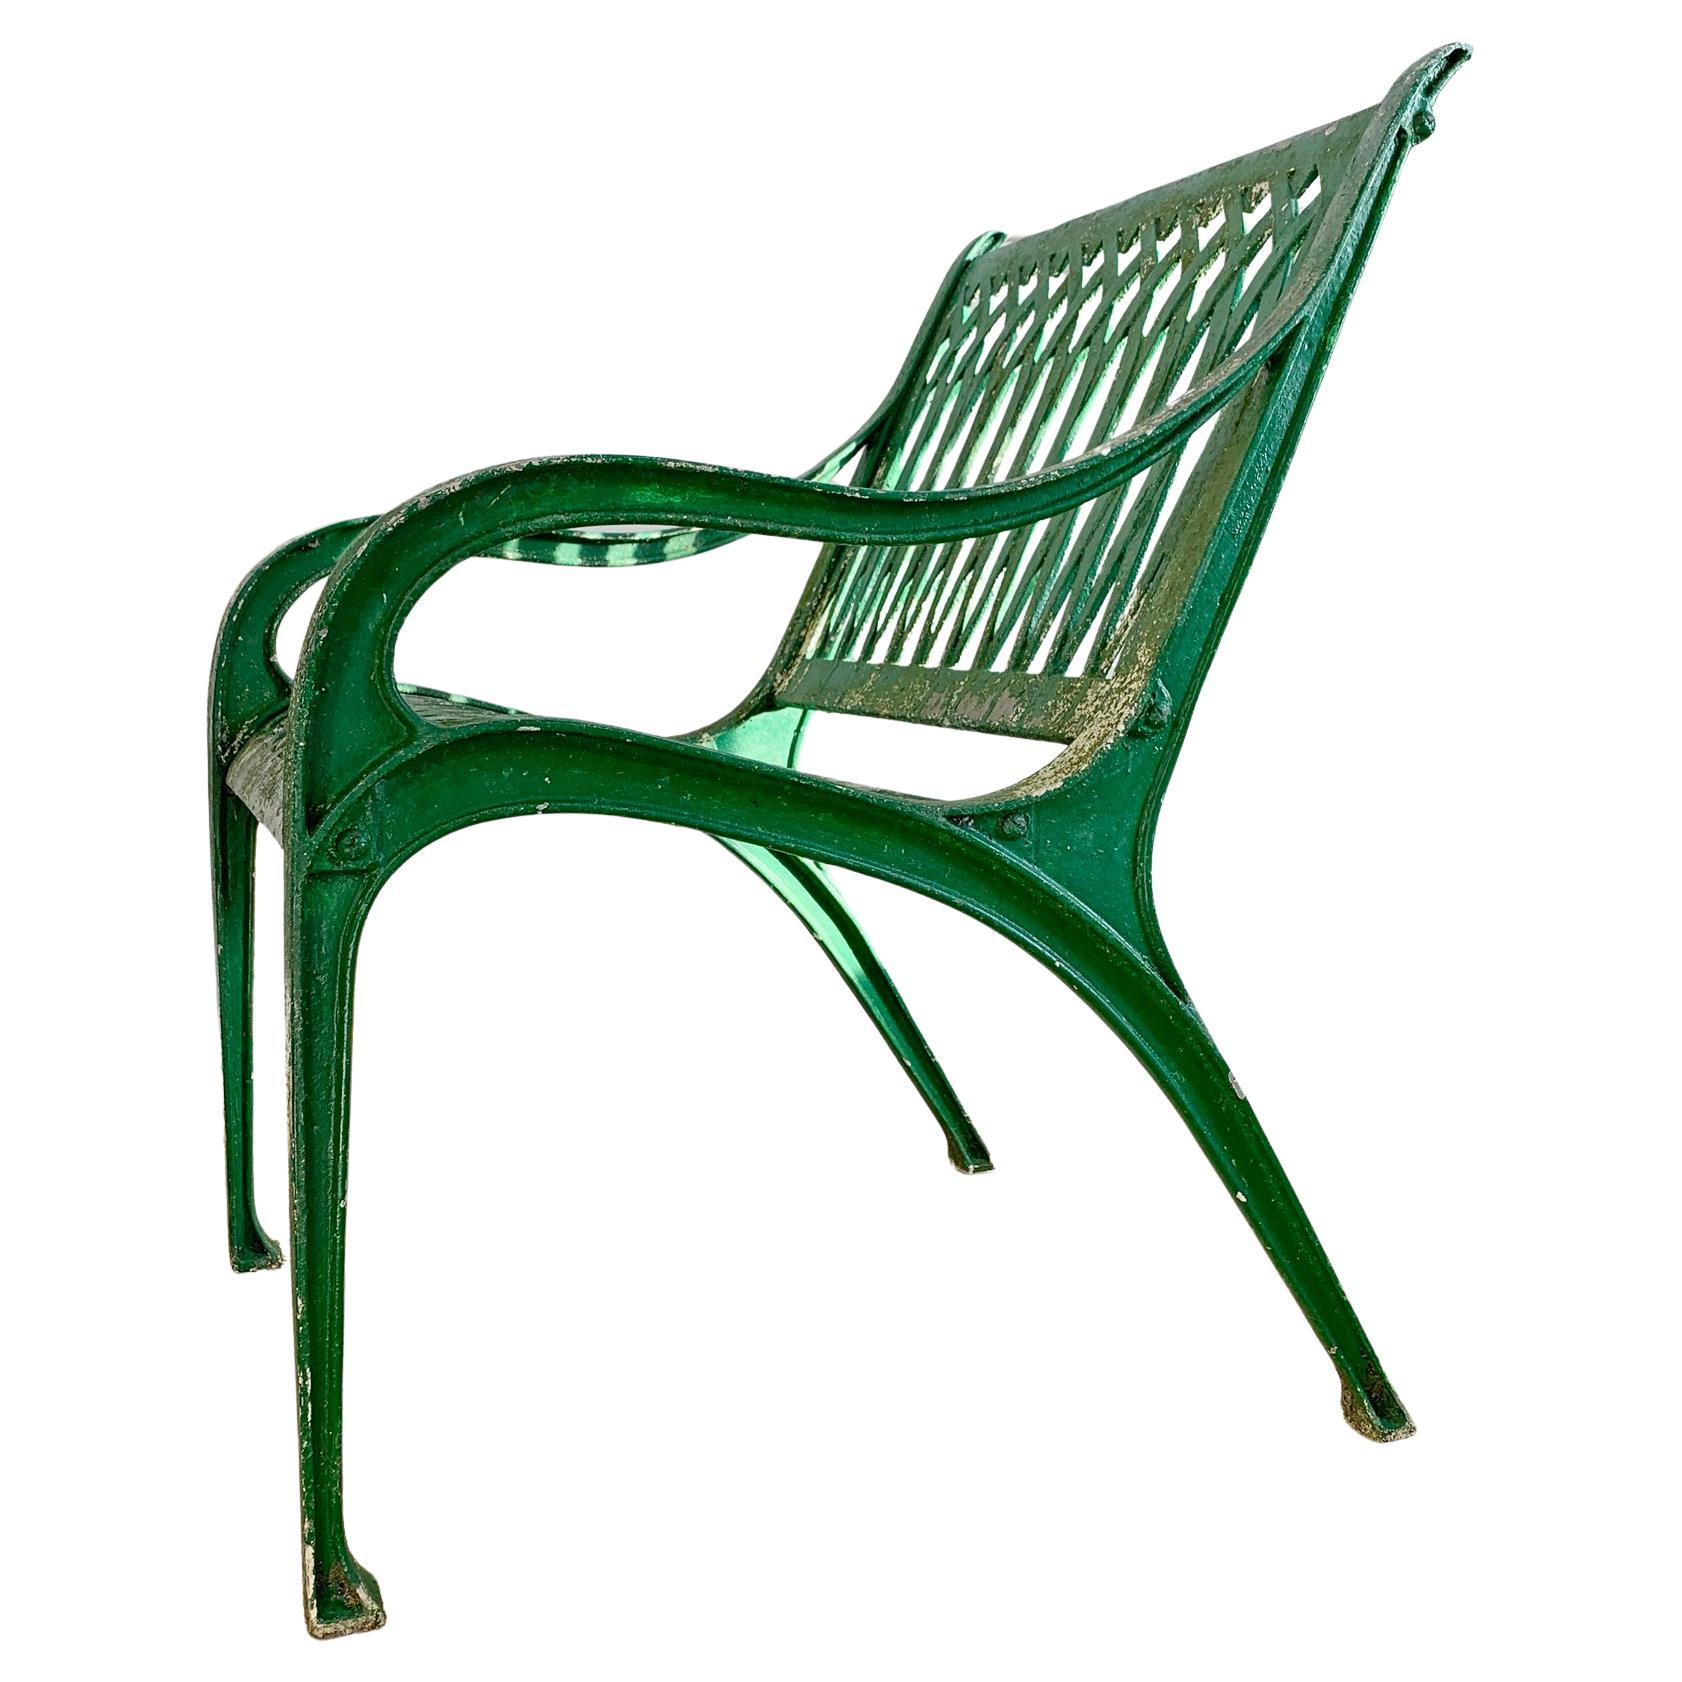 Great looking garden or Orangery chair, cast in aluminium and painted in Emerald green. English circa 1950.

Height 82cm x Width 60cm x Depth 67cm

Seat Height 45cm